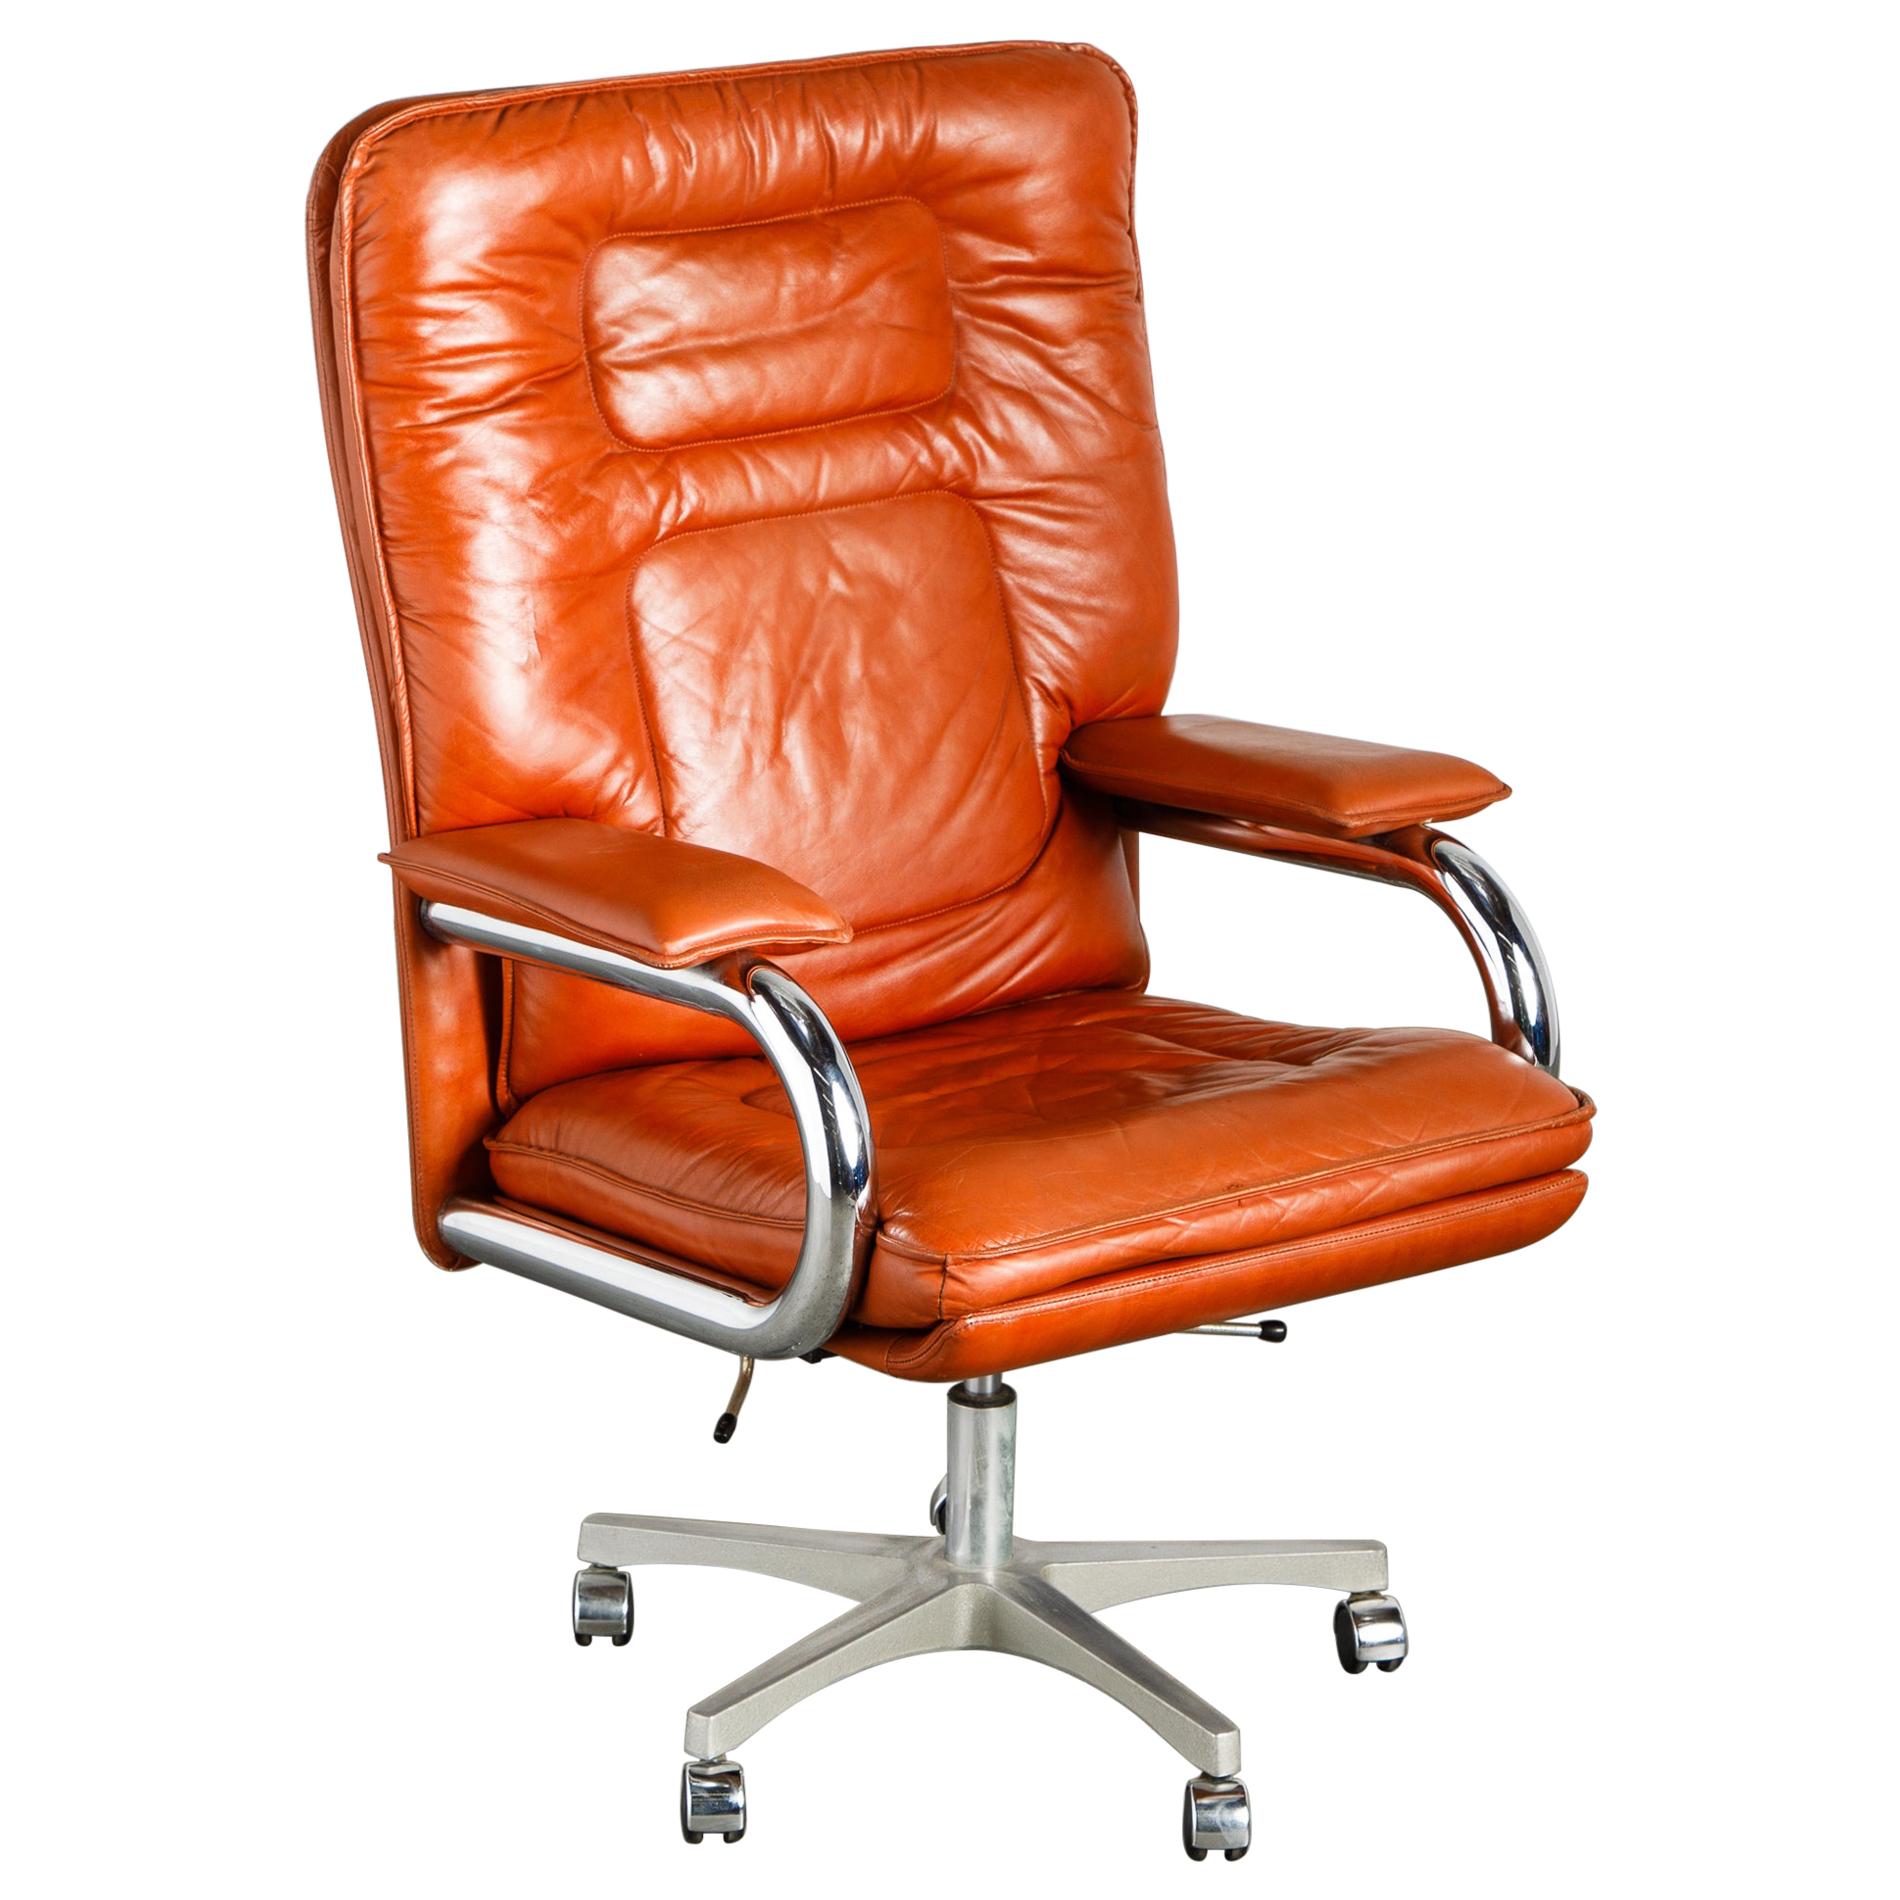 'Big' Leather Executive Desk Chair by Guido Faleschini for i4Mariani, circa 1979